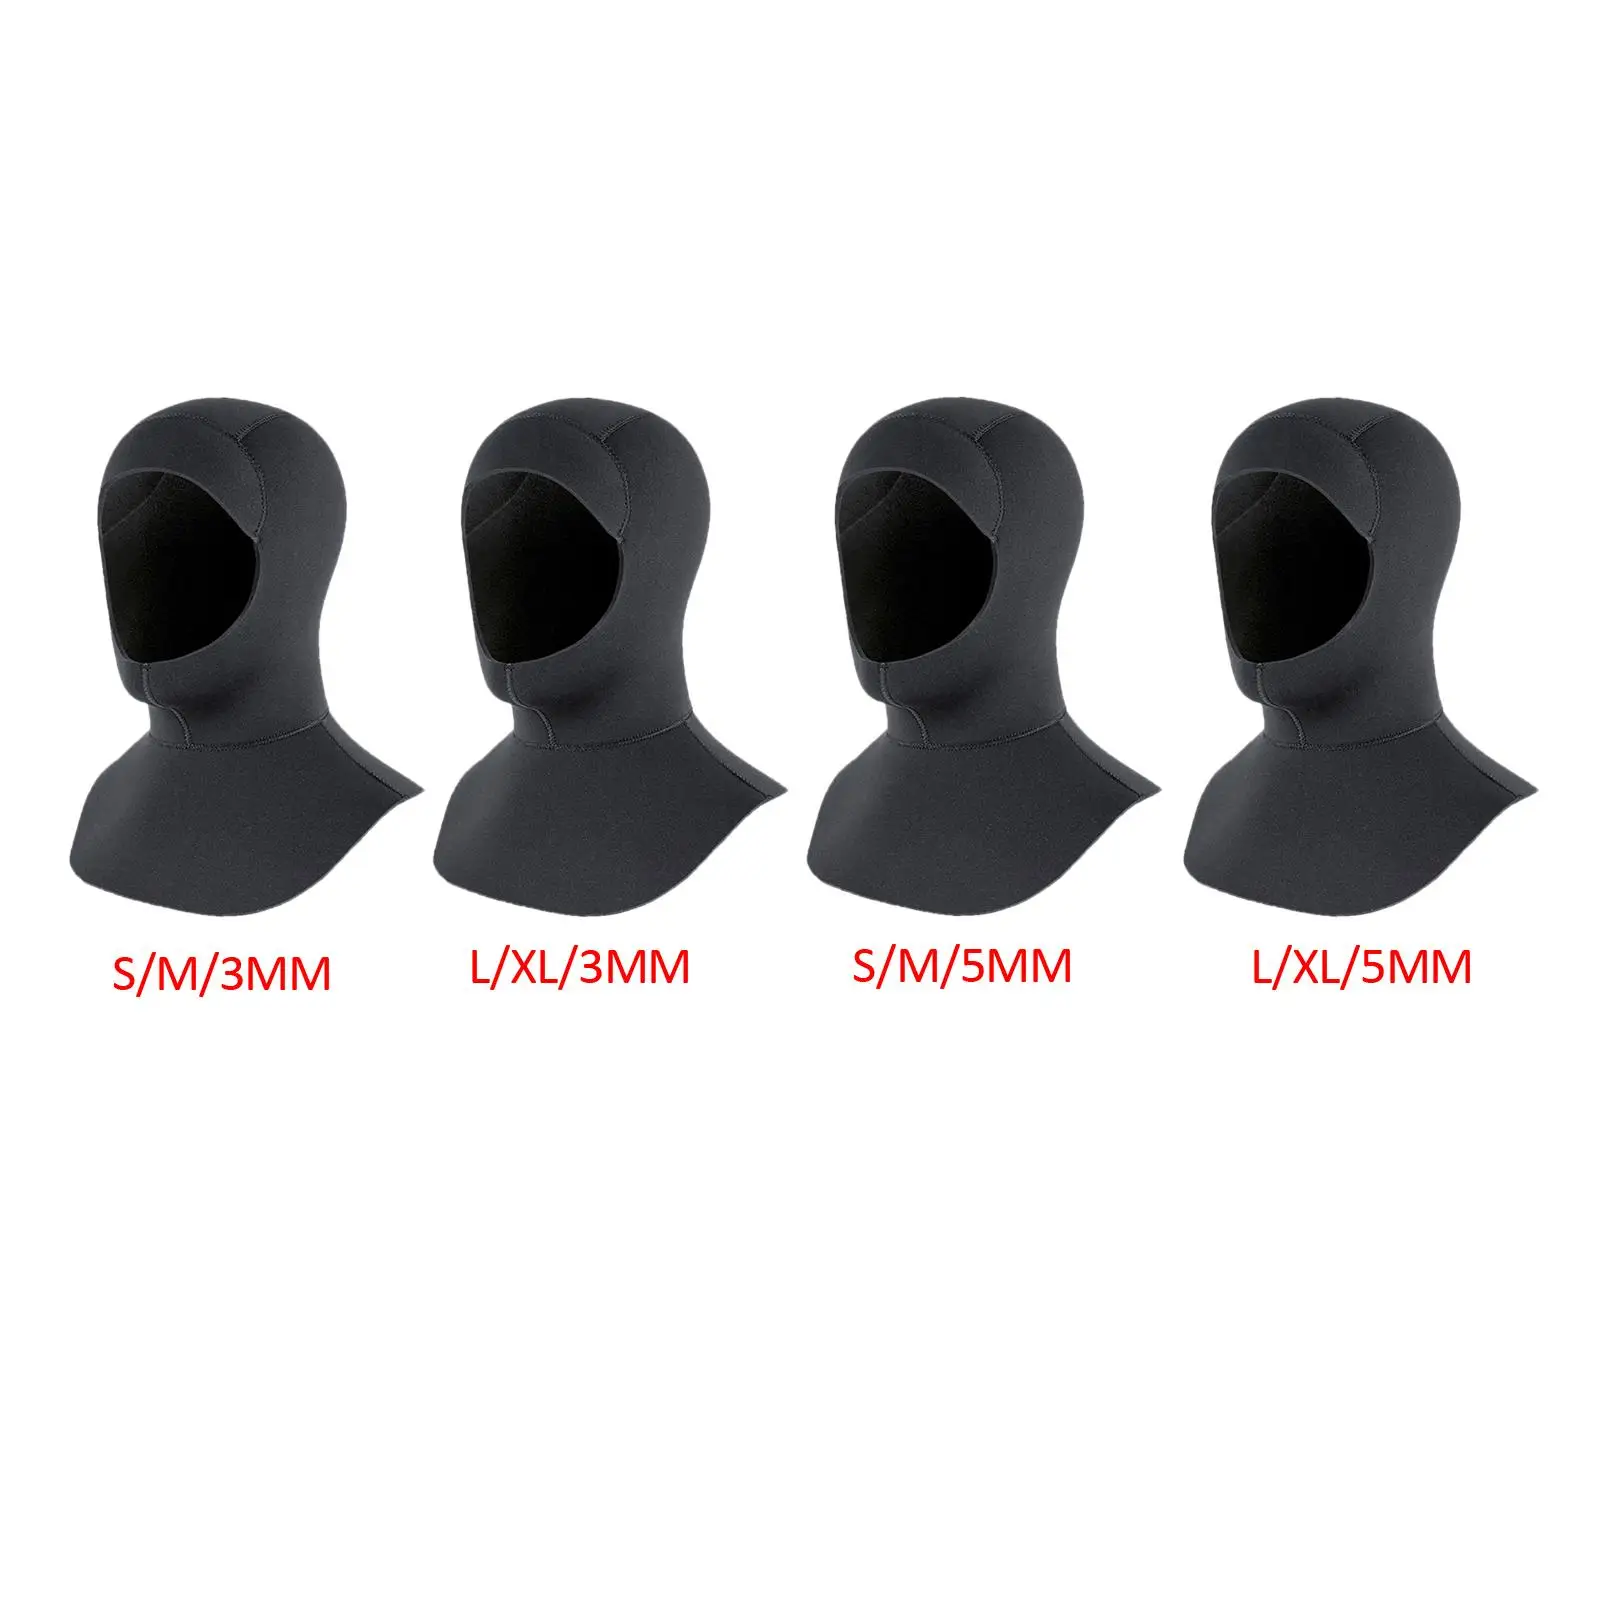 Wetsuit Dive Hood Neoprene Stretchable Head Cover for Sailing Spearfishing Snorkeling